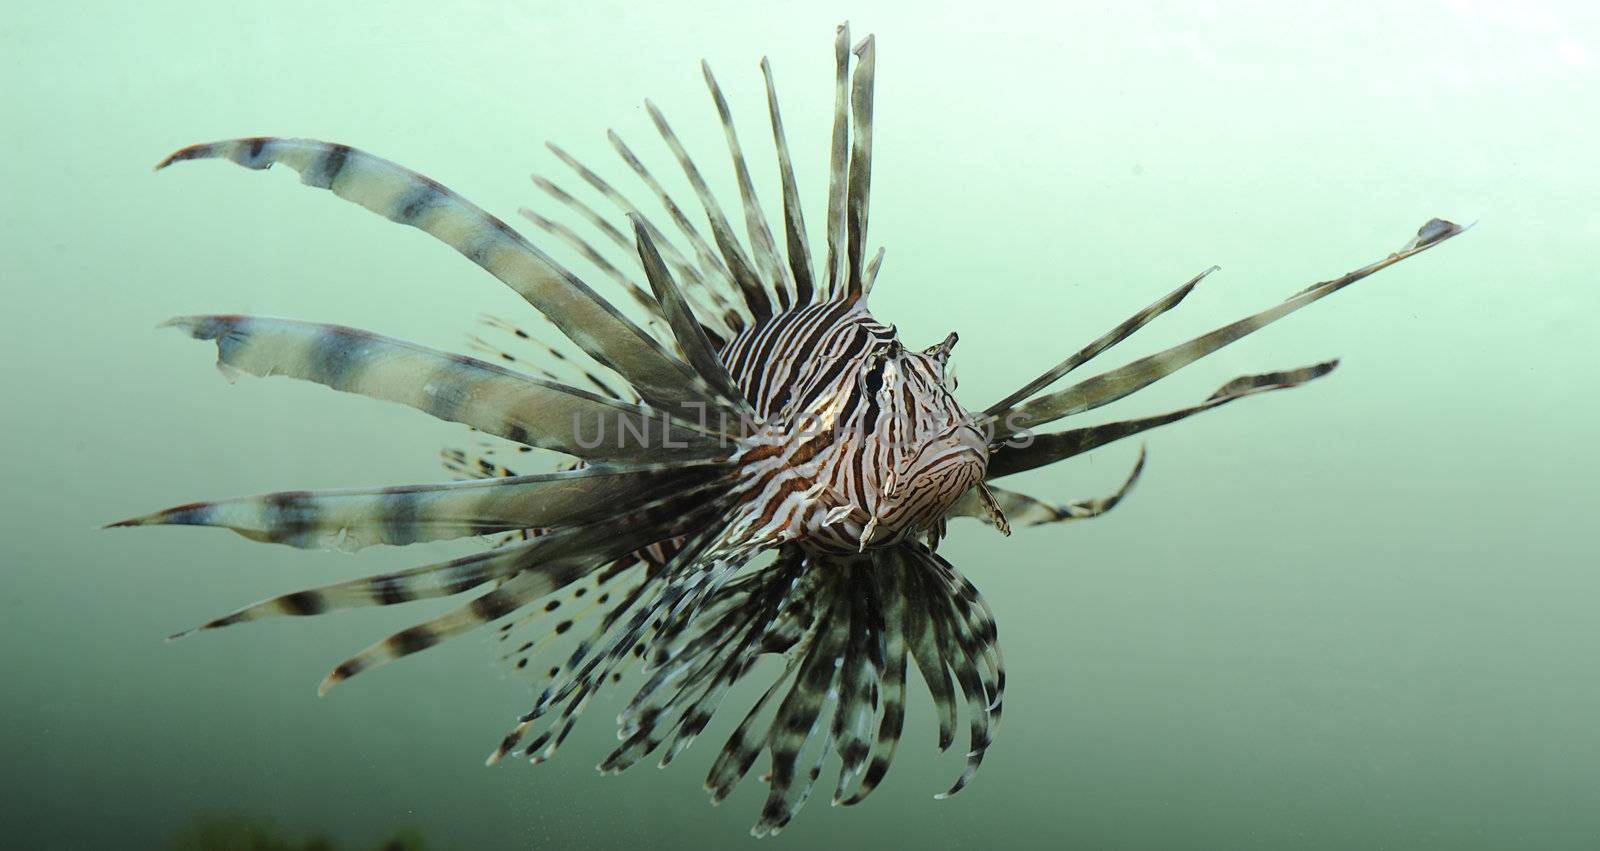 Lionfish, an invasive species, off the coast of florida